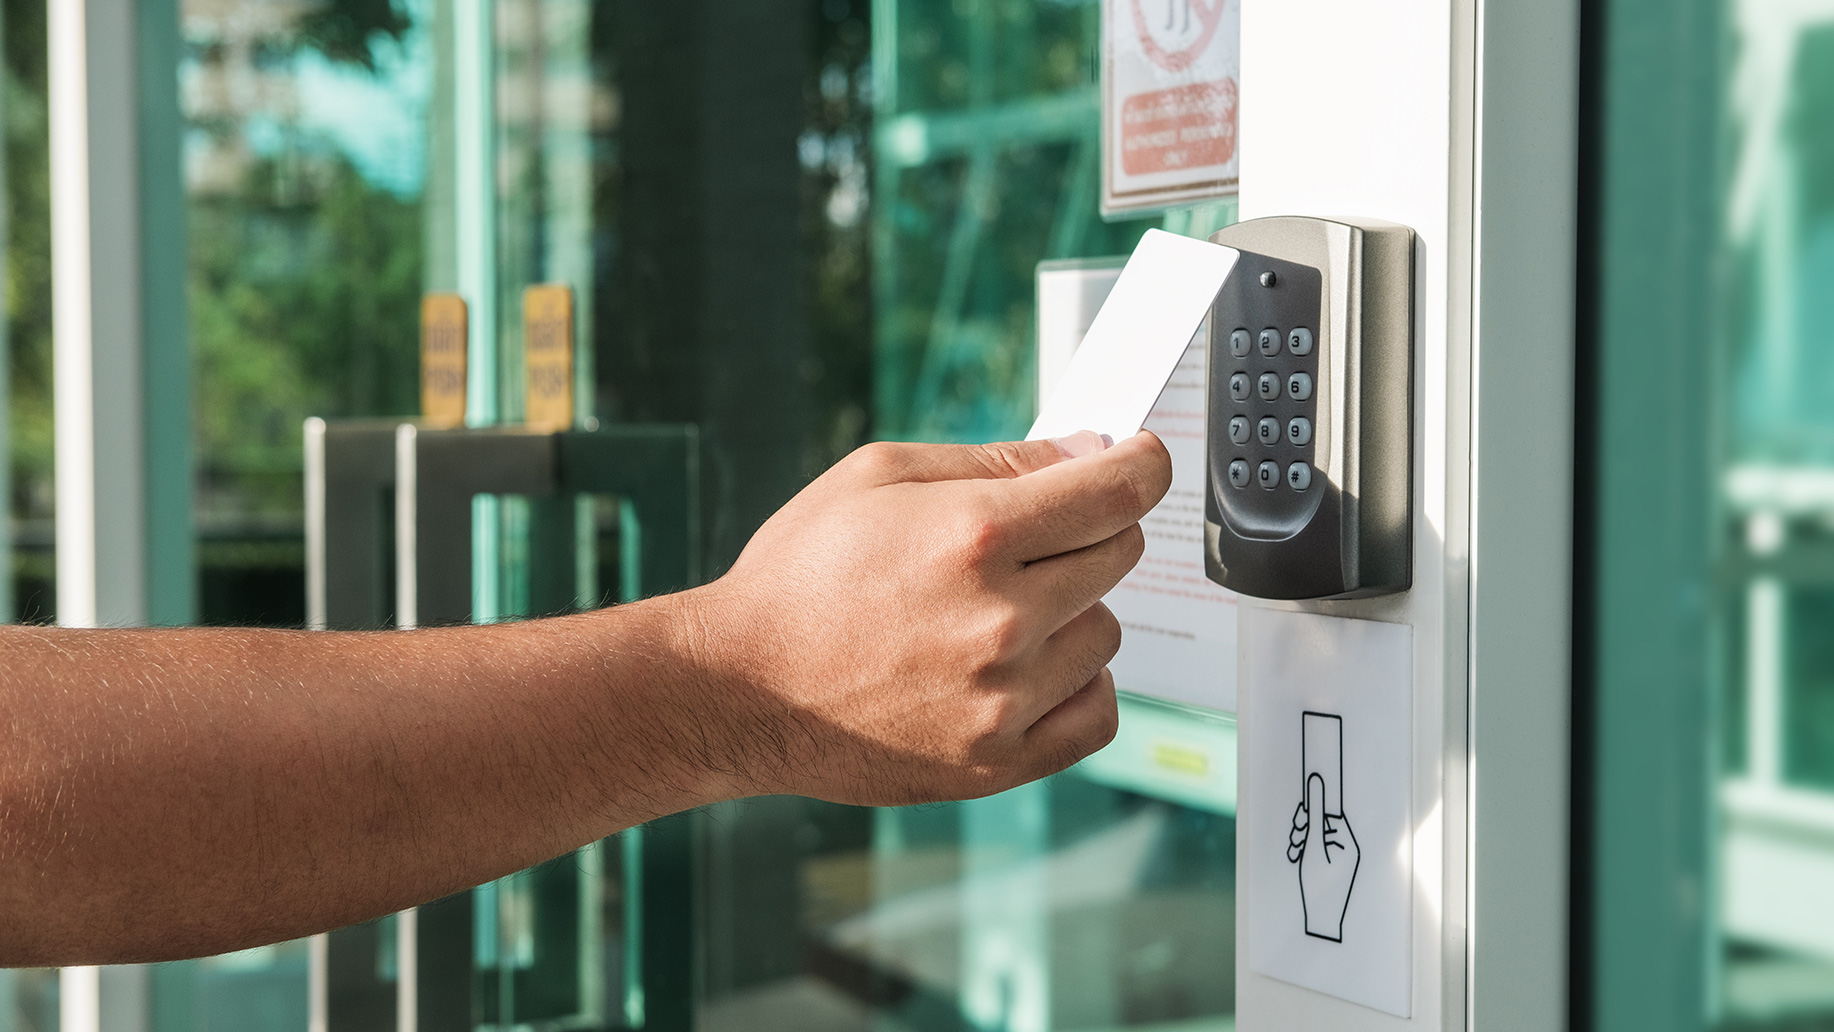 Features of Access Control Systems